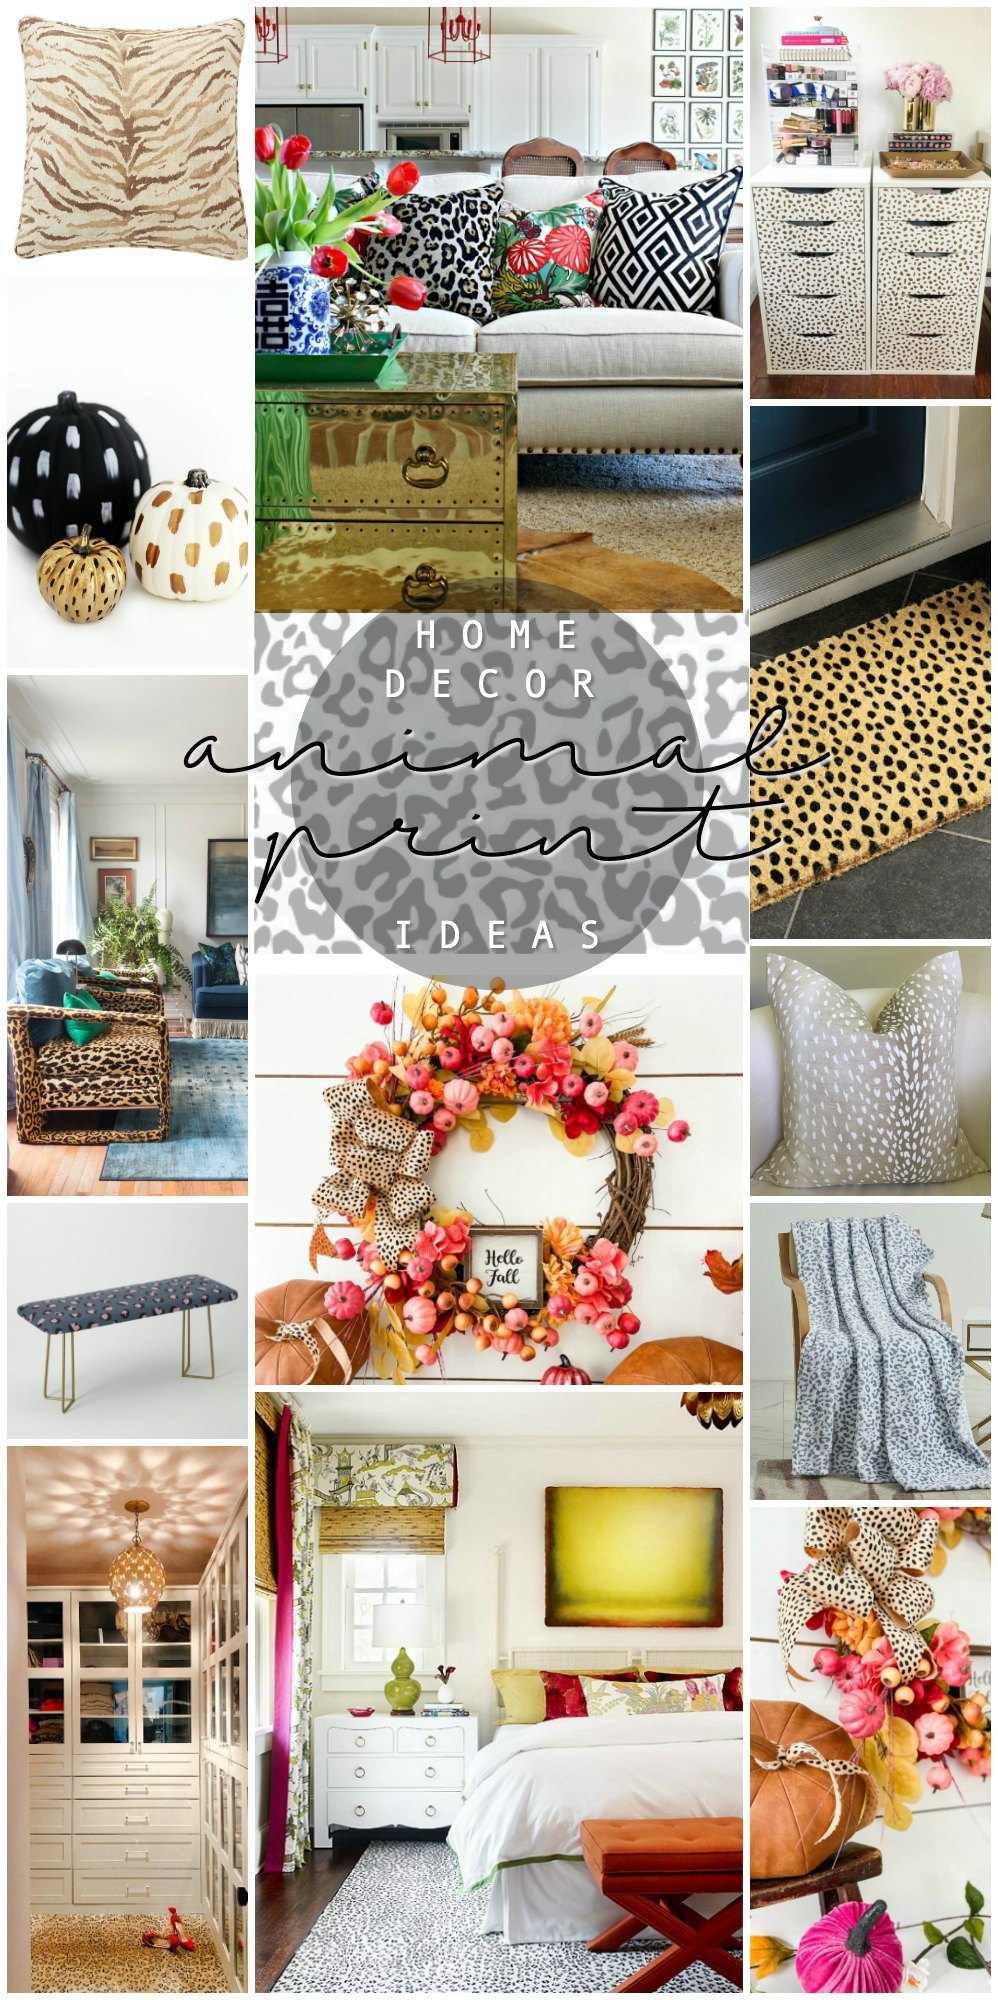 Favorite Animal Print Ideas that I love this Week! I'm sharing my favorite projects, finds and what is making me smile this week! 